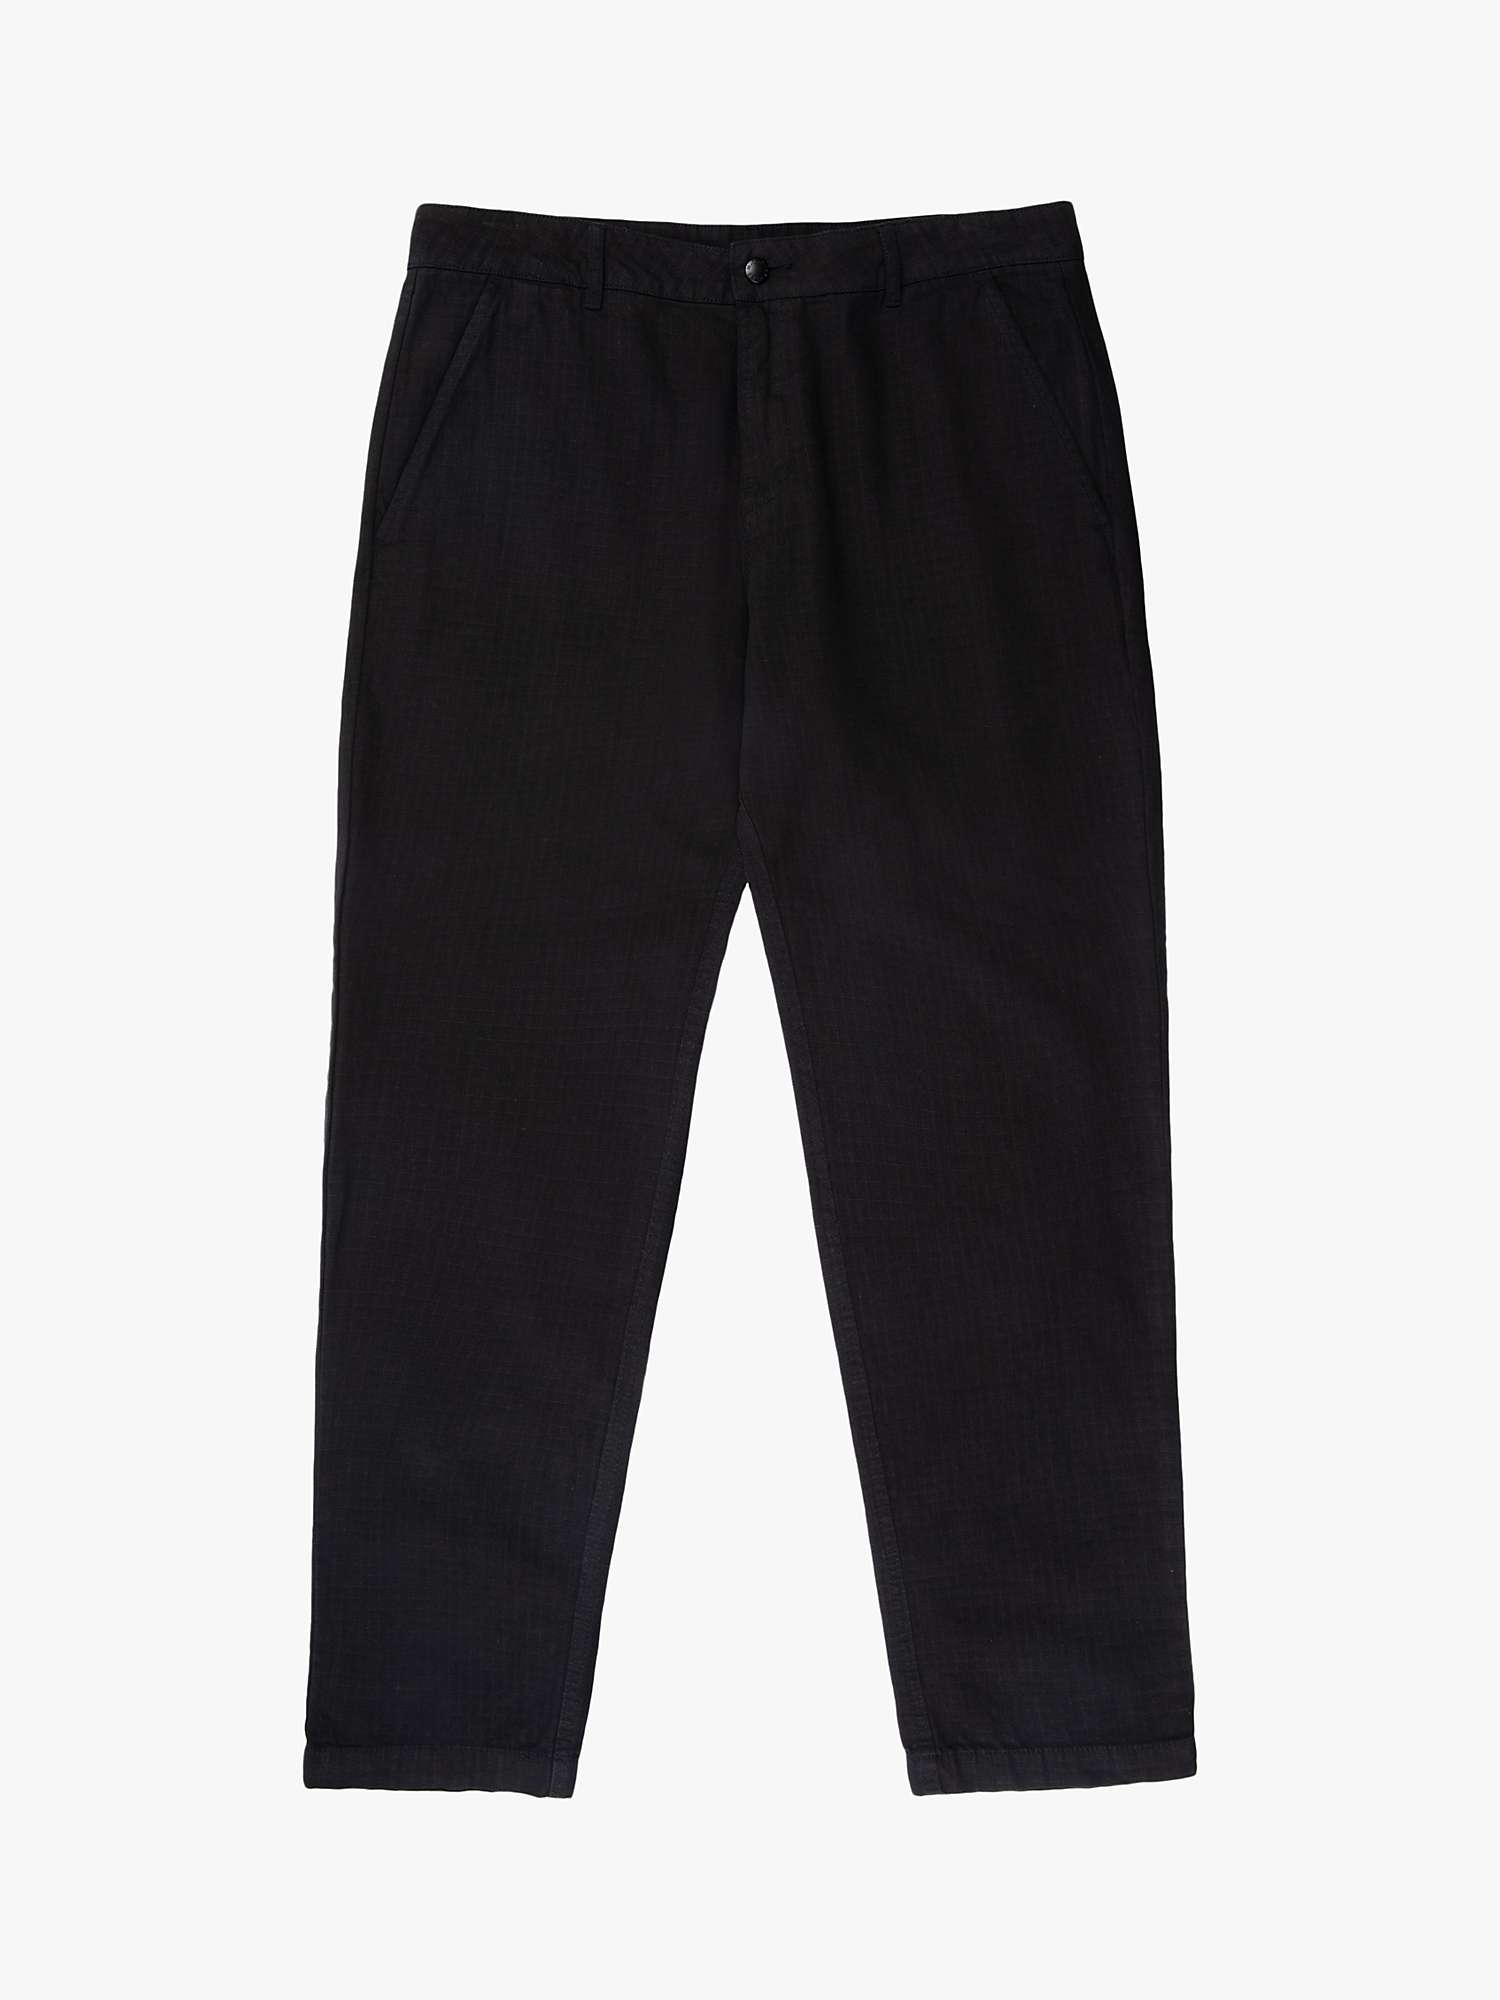 Buy M.C.Overalls Relaxed Fit Ripstop Trousers Online at johnlewis.com